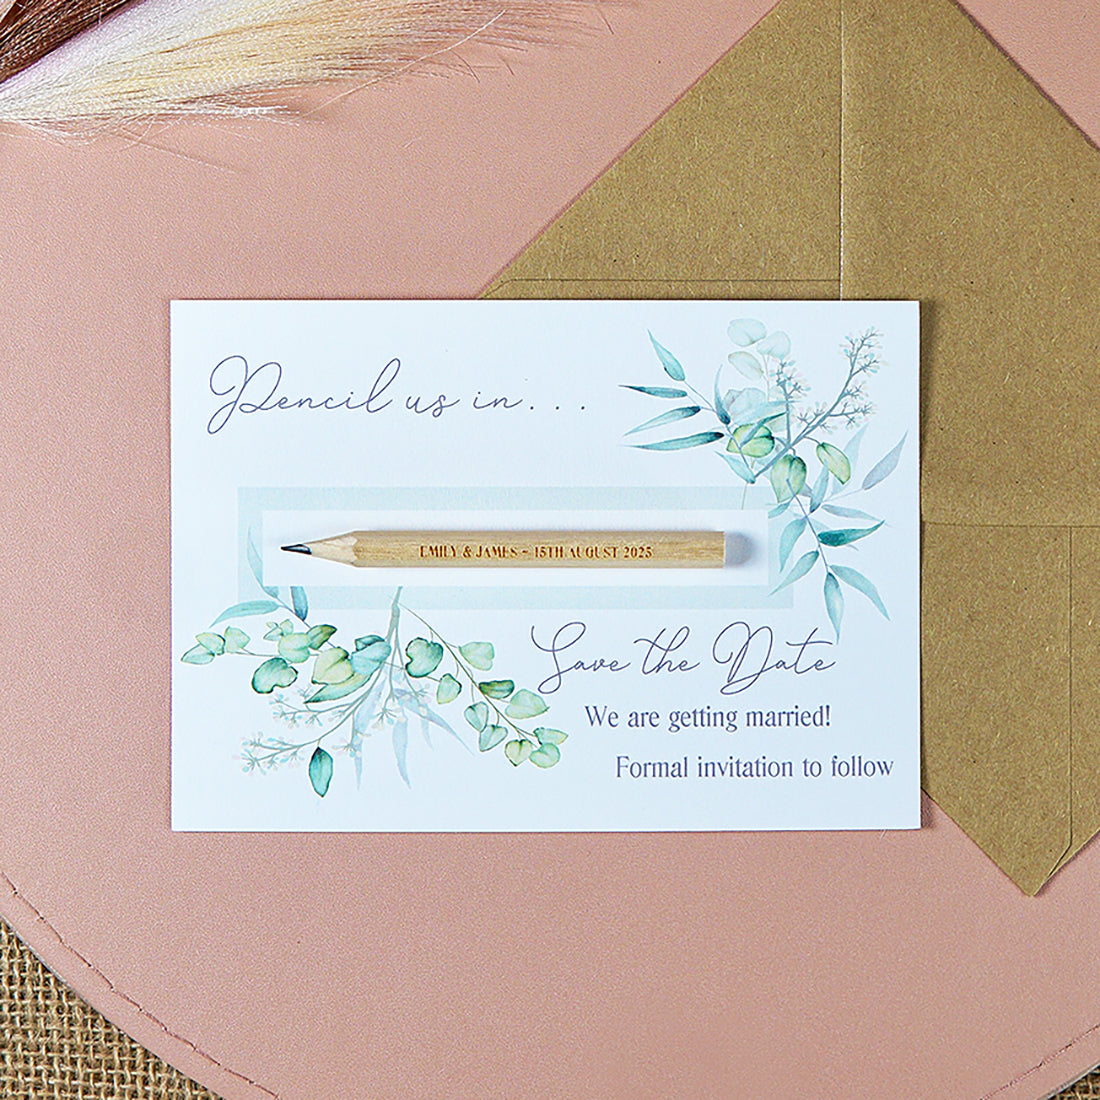 Eucalyptus Pencil Us In Wedding Save The Date Pencils & Cards-Weddings by Lumi